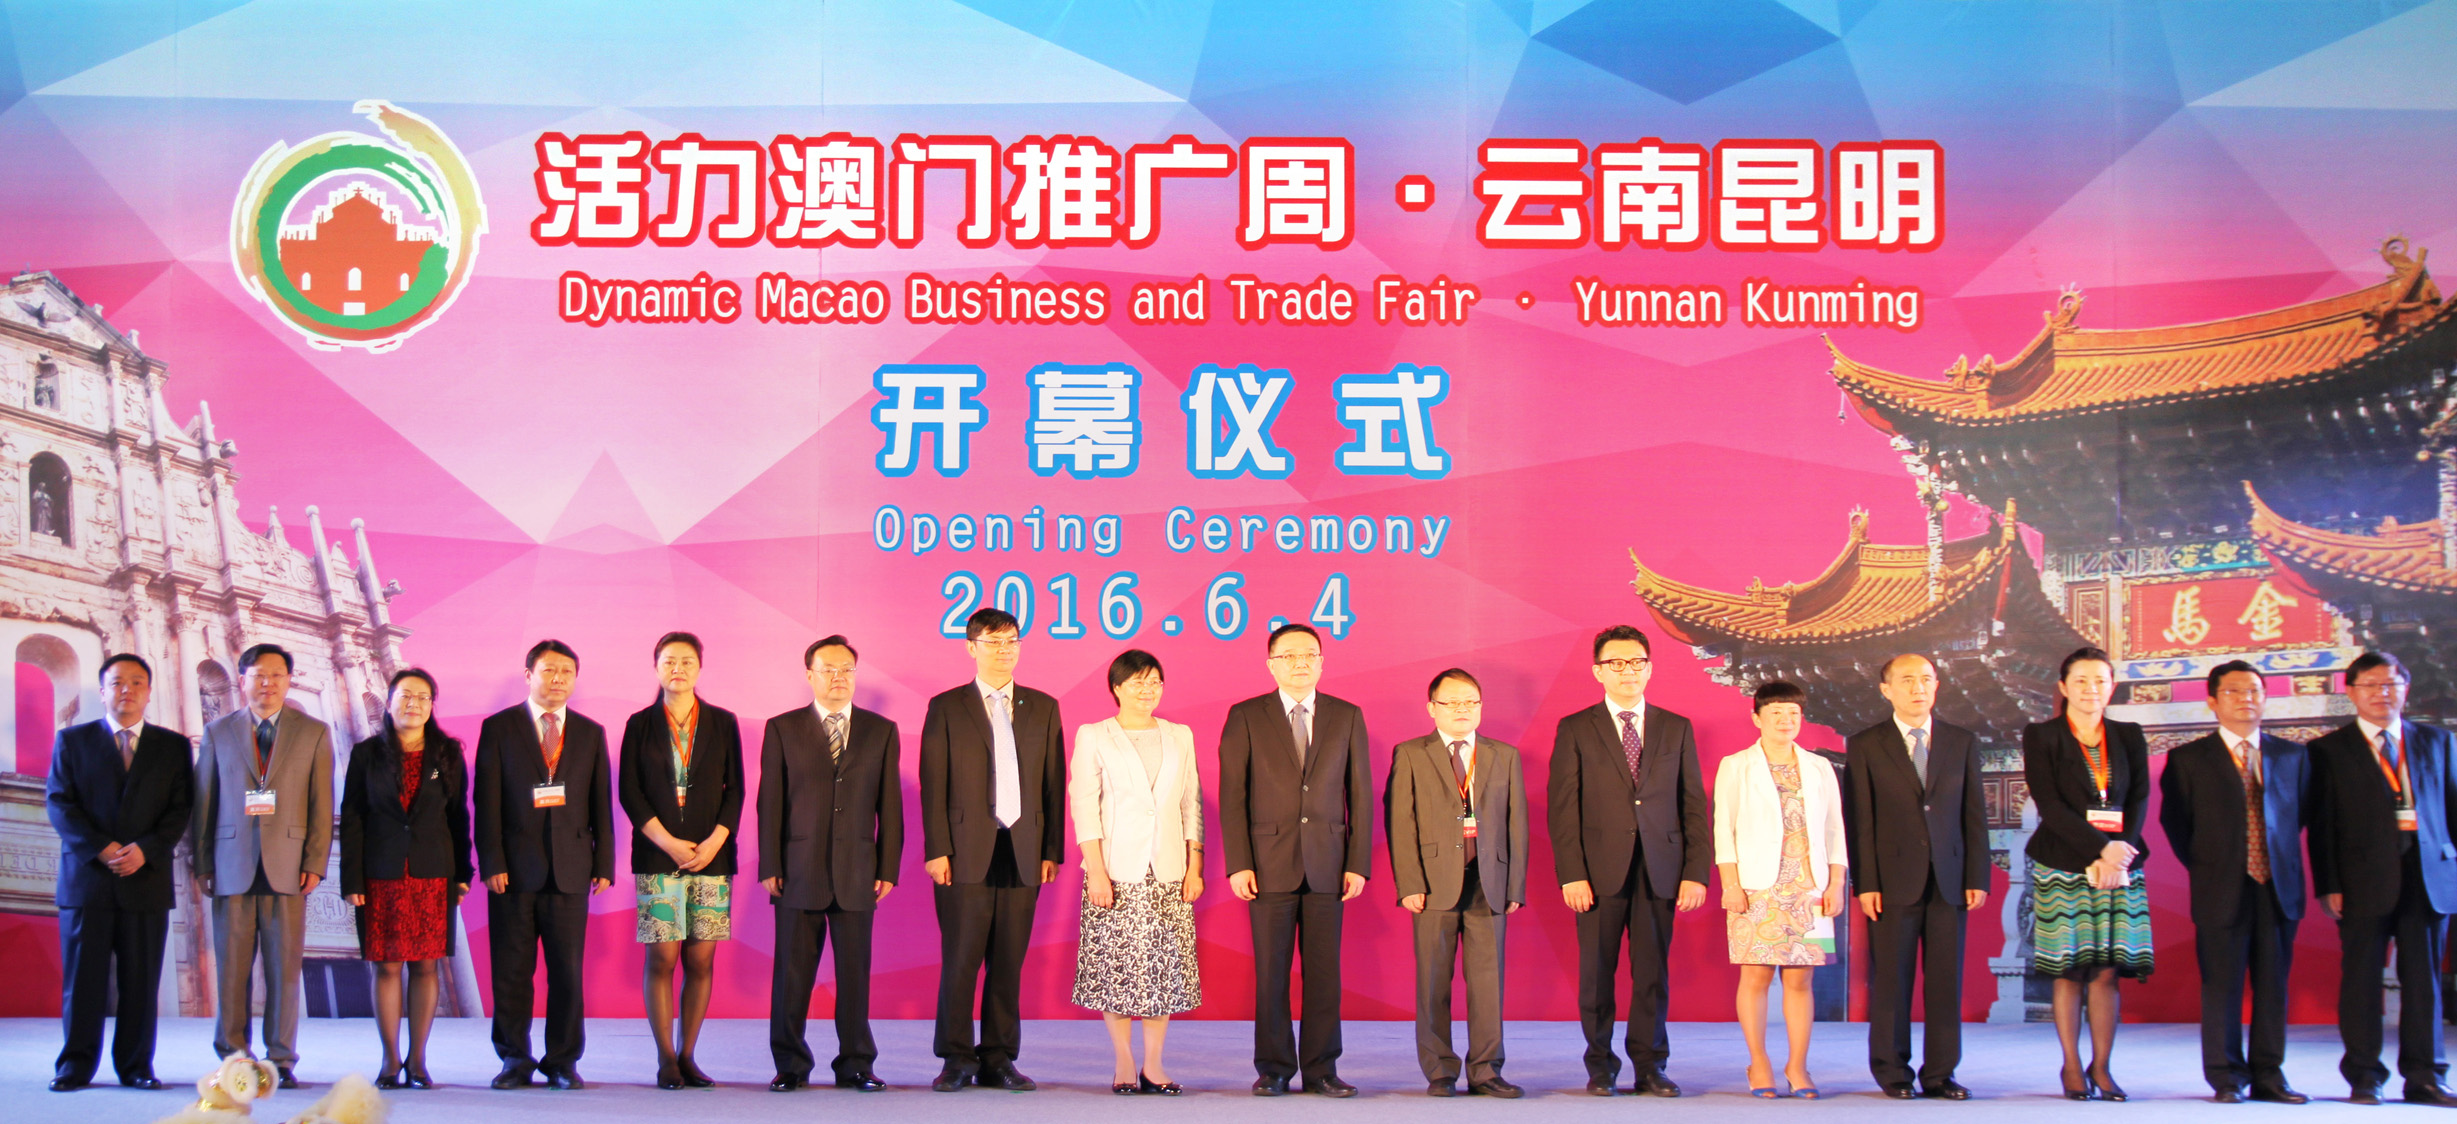 Opening ceremony of the Dynamic Macao Business and Trade Fair-Kunming,Yunnan